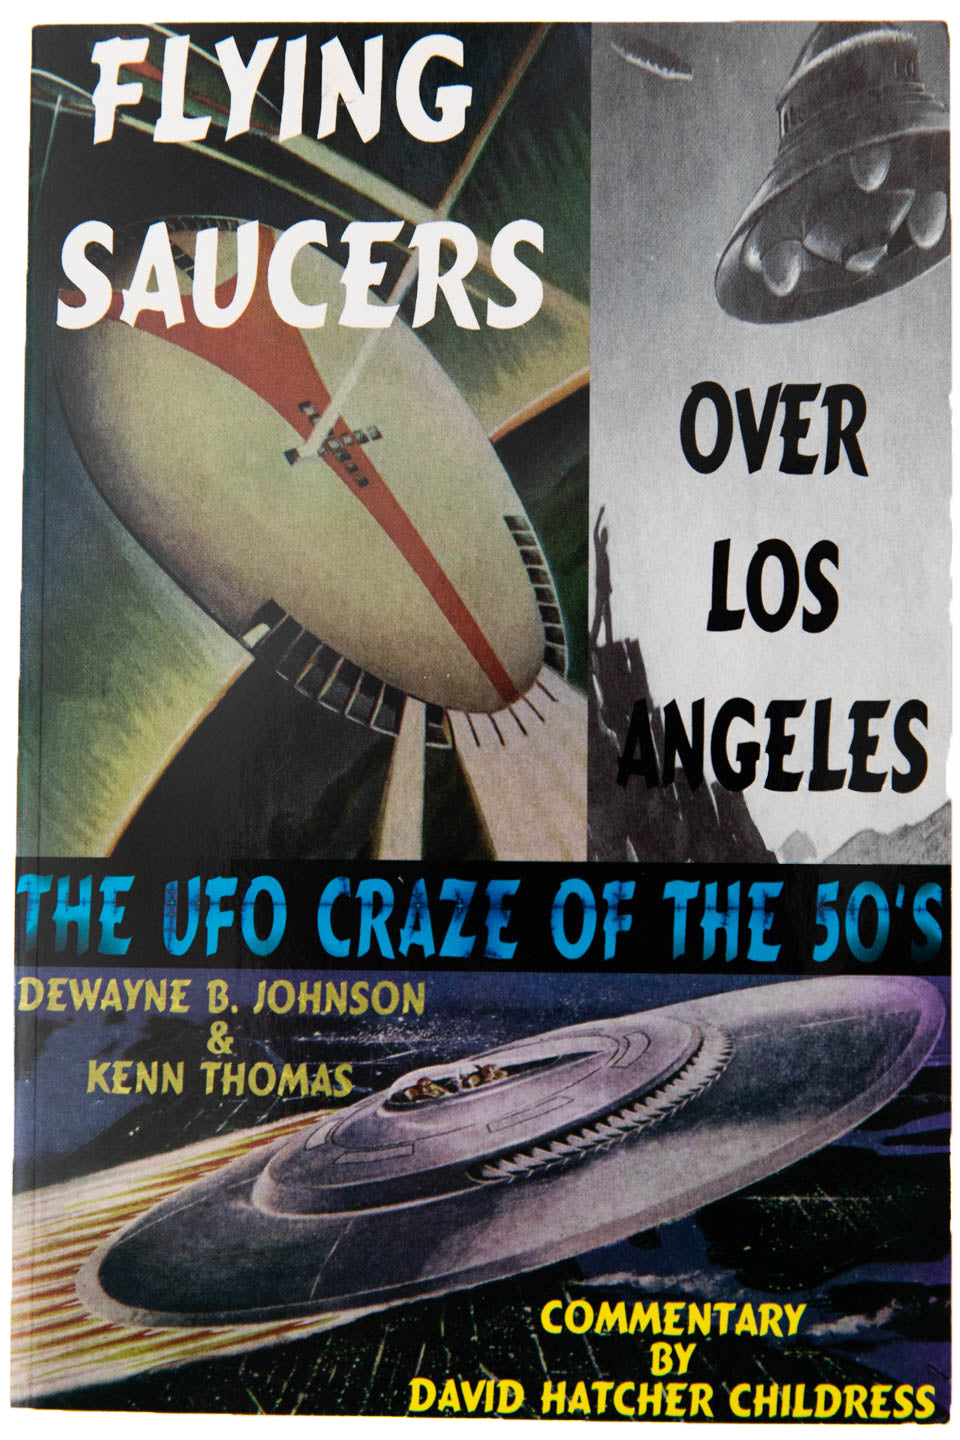 FLYING SAUCERS OVER LOS ANGELES | The UFO Craze of the 50's